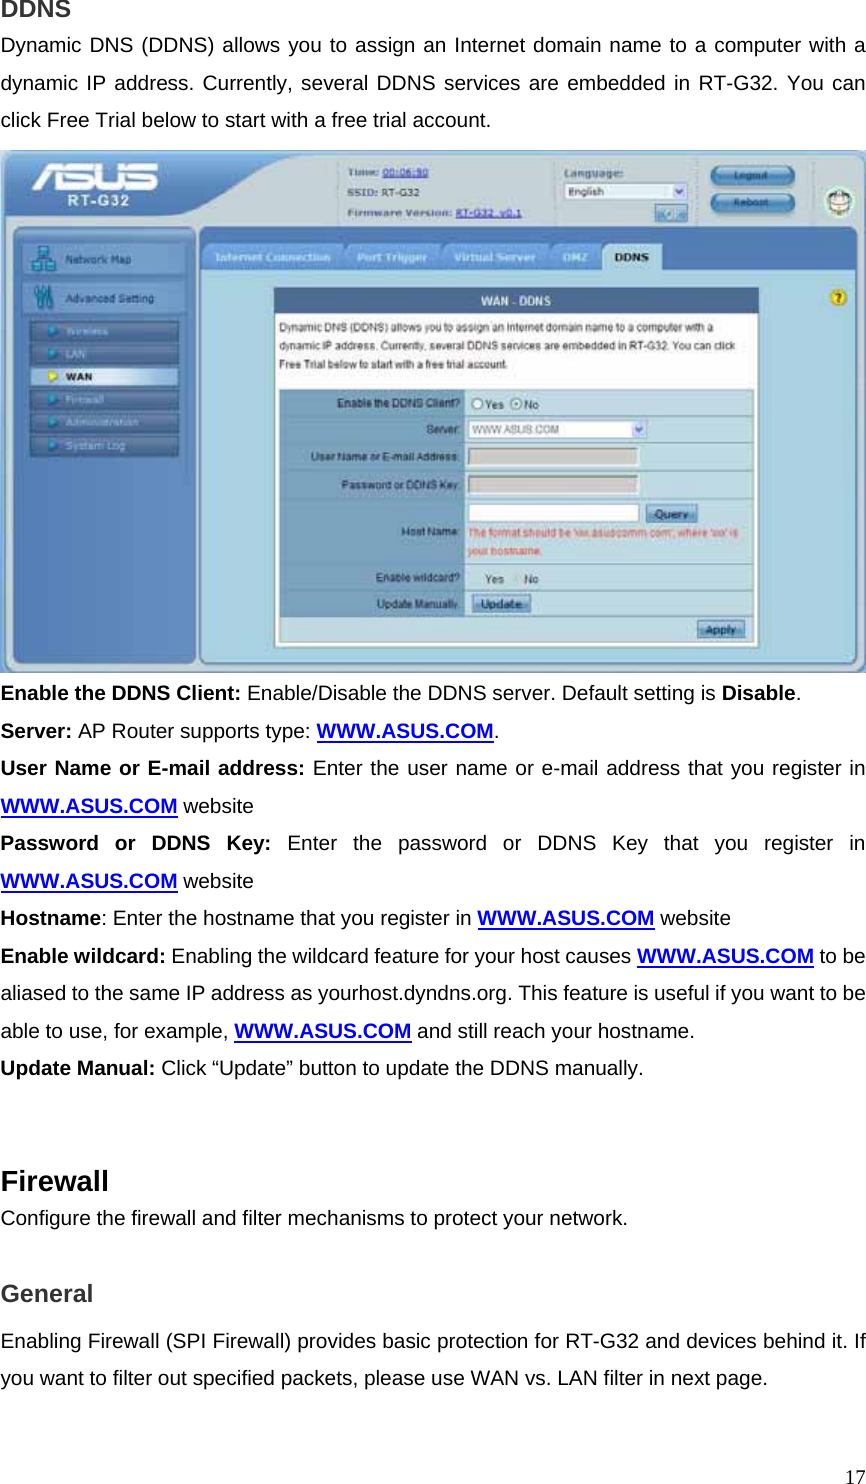  17DDNS Dynamic DNS (DDNS) allows you to assign an Internet domain name to a computer with a dynamic IP address. Currently, several DDNS services are embedded in RT-G32. You can click Free Trial below to start with a free trial account.  Enable the DDNS Client: Enable/Disable the DDNS server. Default setting is Disable. Server: AP Router supports type: WWW.ASUS.COM. User Name or E-mail address: Enter the user name or e-mail address that you register in WWW.ASUS.COM website Password or DDNS Key: Enter the password or DDNS Key that you register in WWW.ASUS.COM website Hostname: Enter the hostname that you register in WWW.ASUS.COM website Enable wildcard: Enabling the wildcard feature for your host causes WWW.ASUS.COM to be aliased to the same IP address as yourhost.dyndns.org. This feature is useful if you want to be able to use, for example, WWW.ASUS.COM and still reach your hostname. Update Manual: Click “Update” button to update the DDNS manually.   Firewall Configure the firewall and filter mechanisms to protect your network.  General Enabling Firewall (SPI Firewall) provides basic protection for RT-G32 and devices behind it. If you want to filter out specified packets, please use WAN vs. LAN filter in next page. 